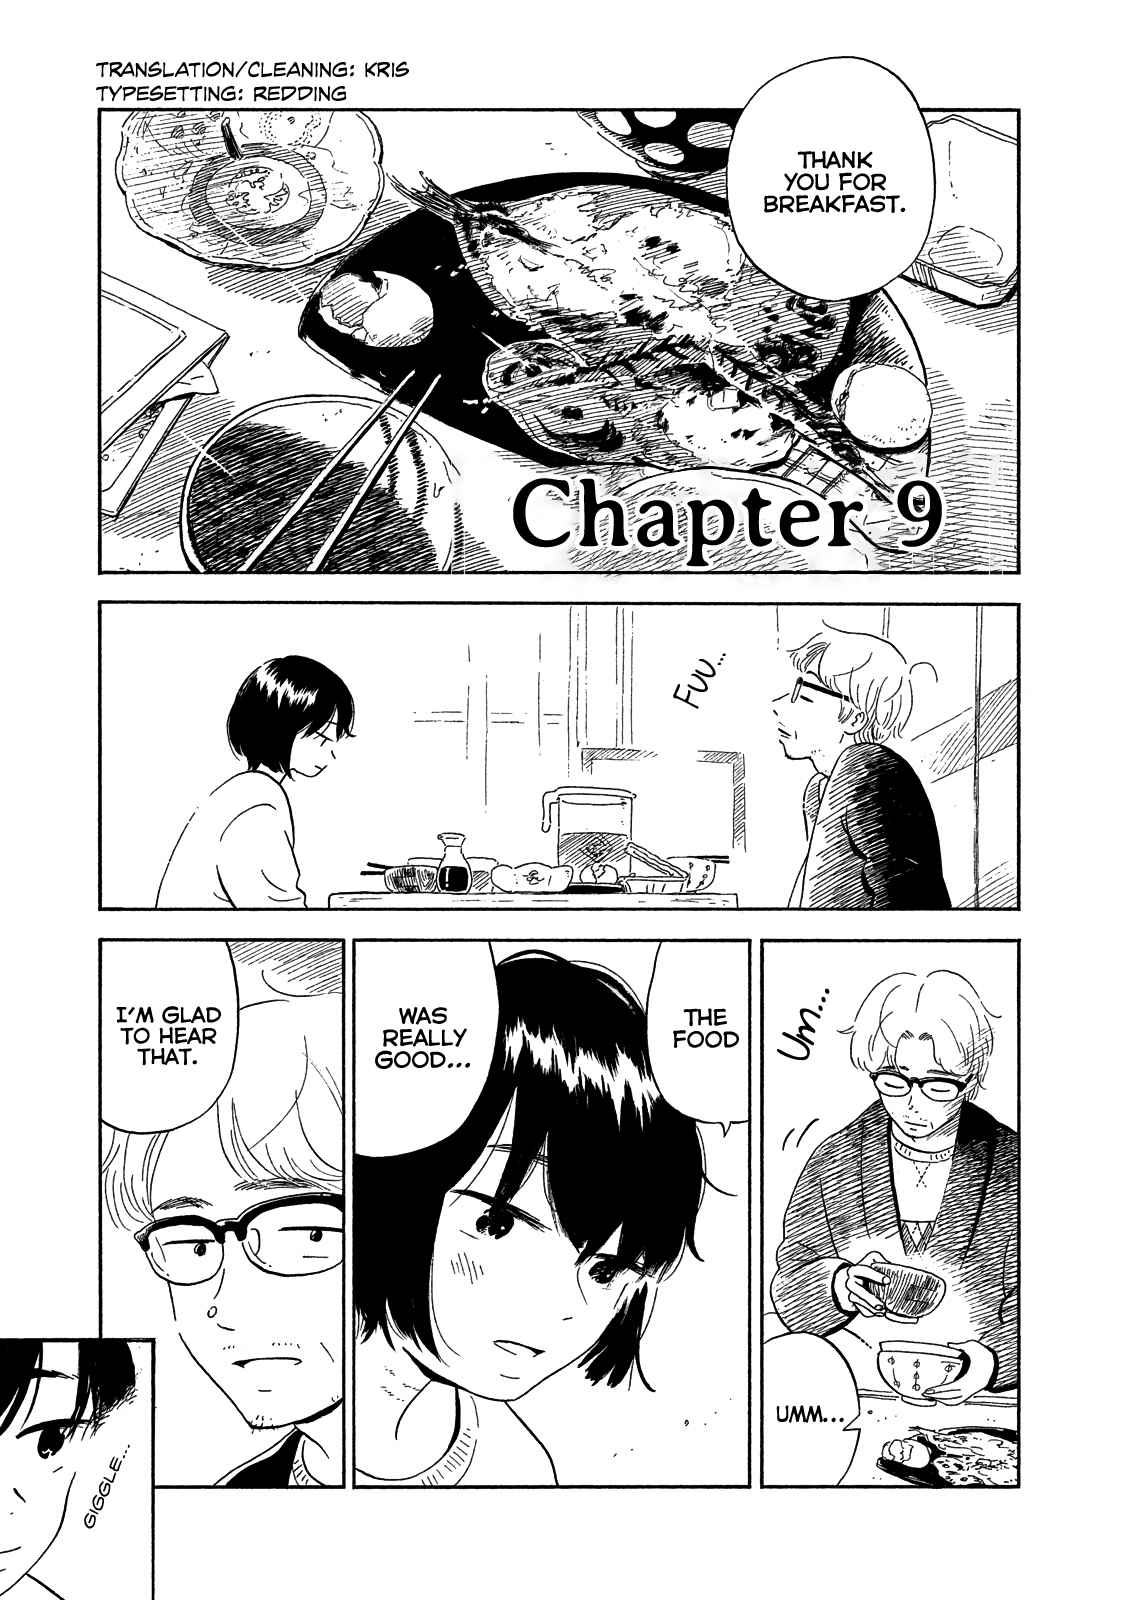 The Stray and the Weeds Vol. 2 Ch. 9